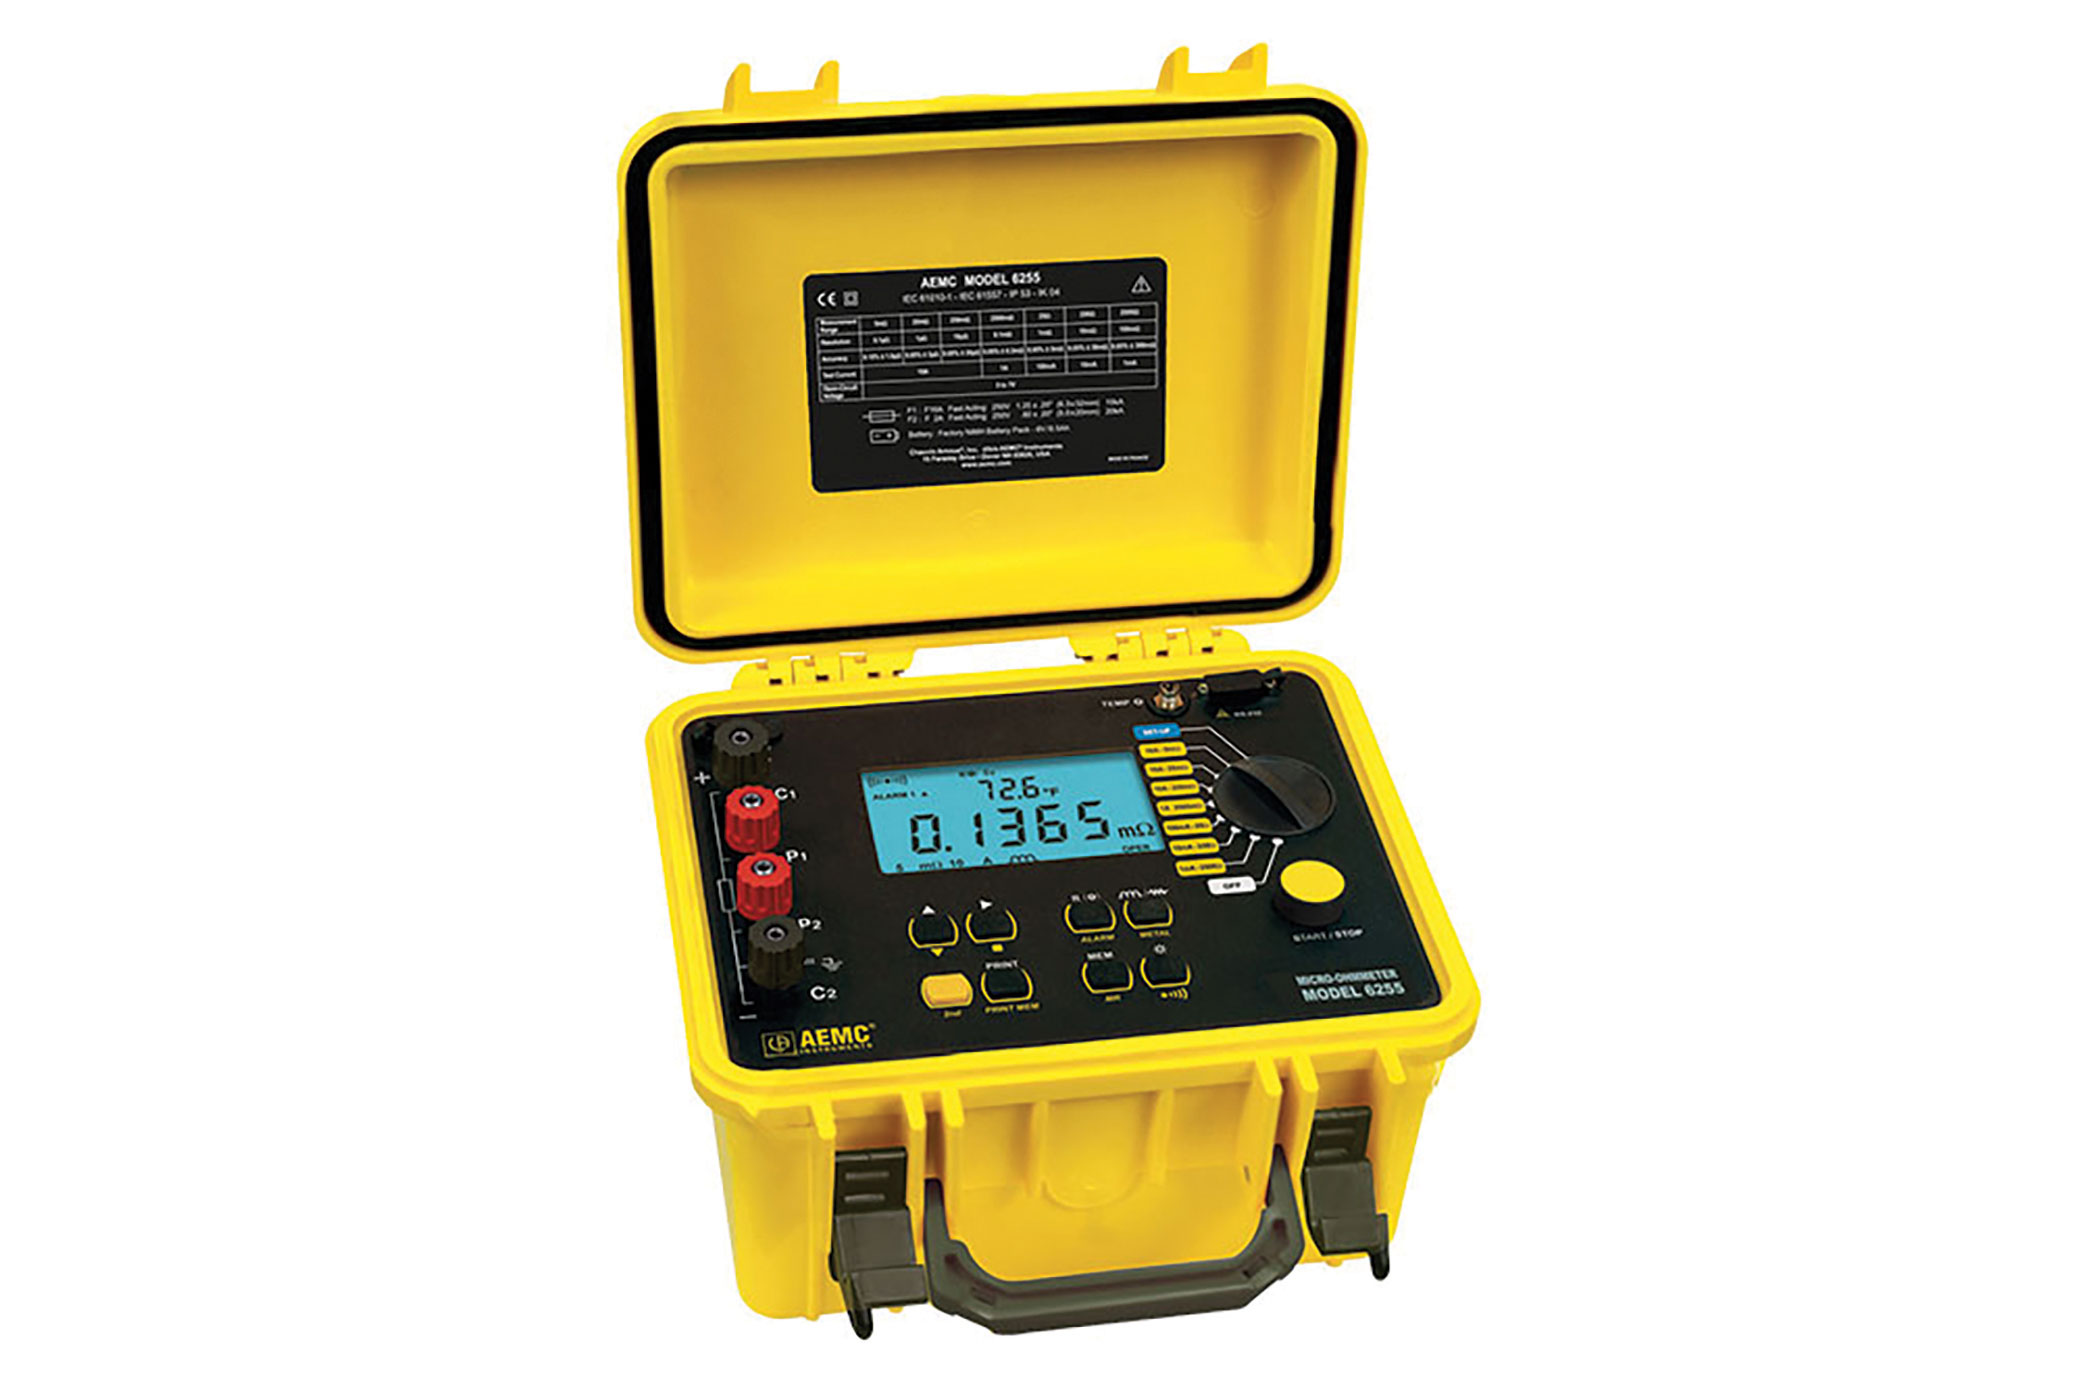 Black, red and yellow micro-ohmmeter. Image by AEMC.